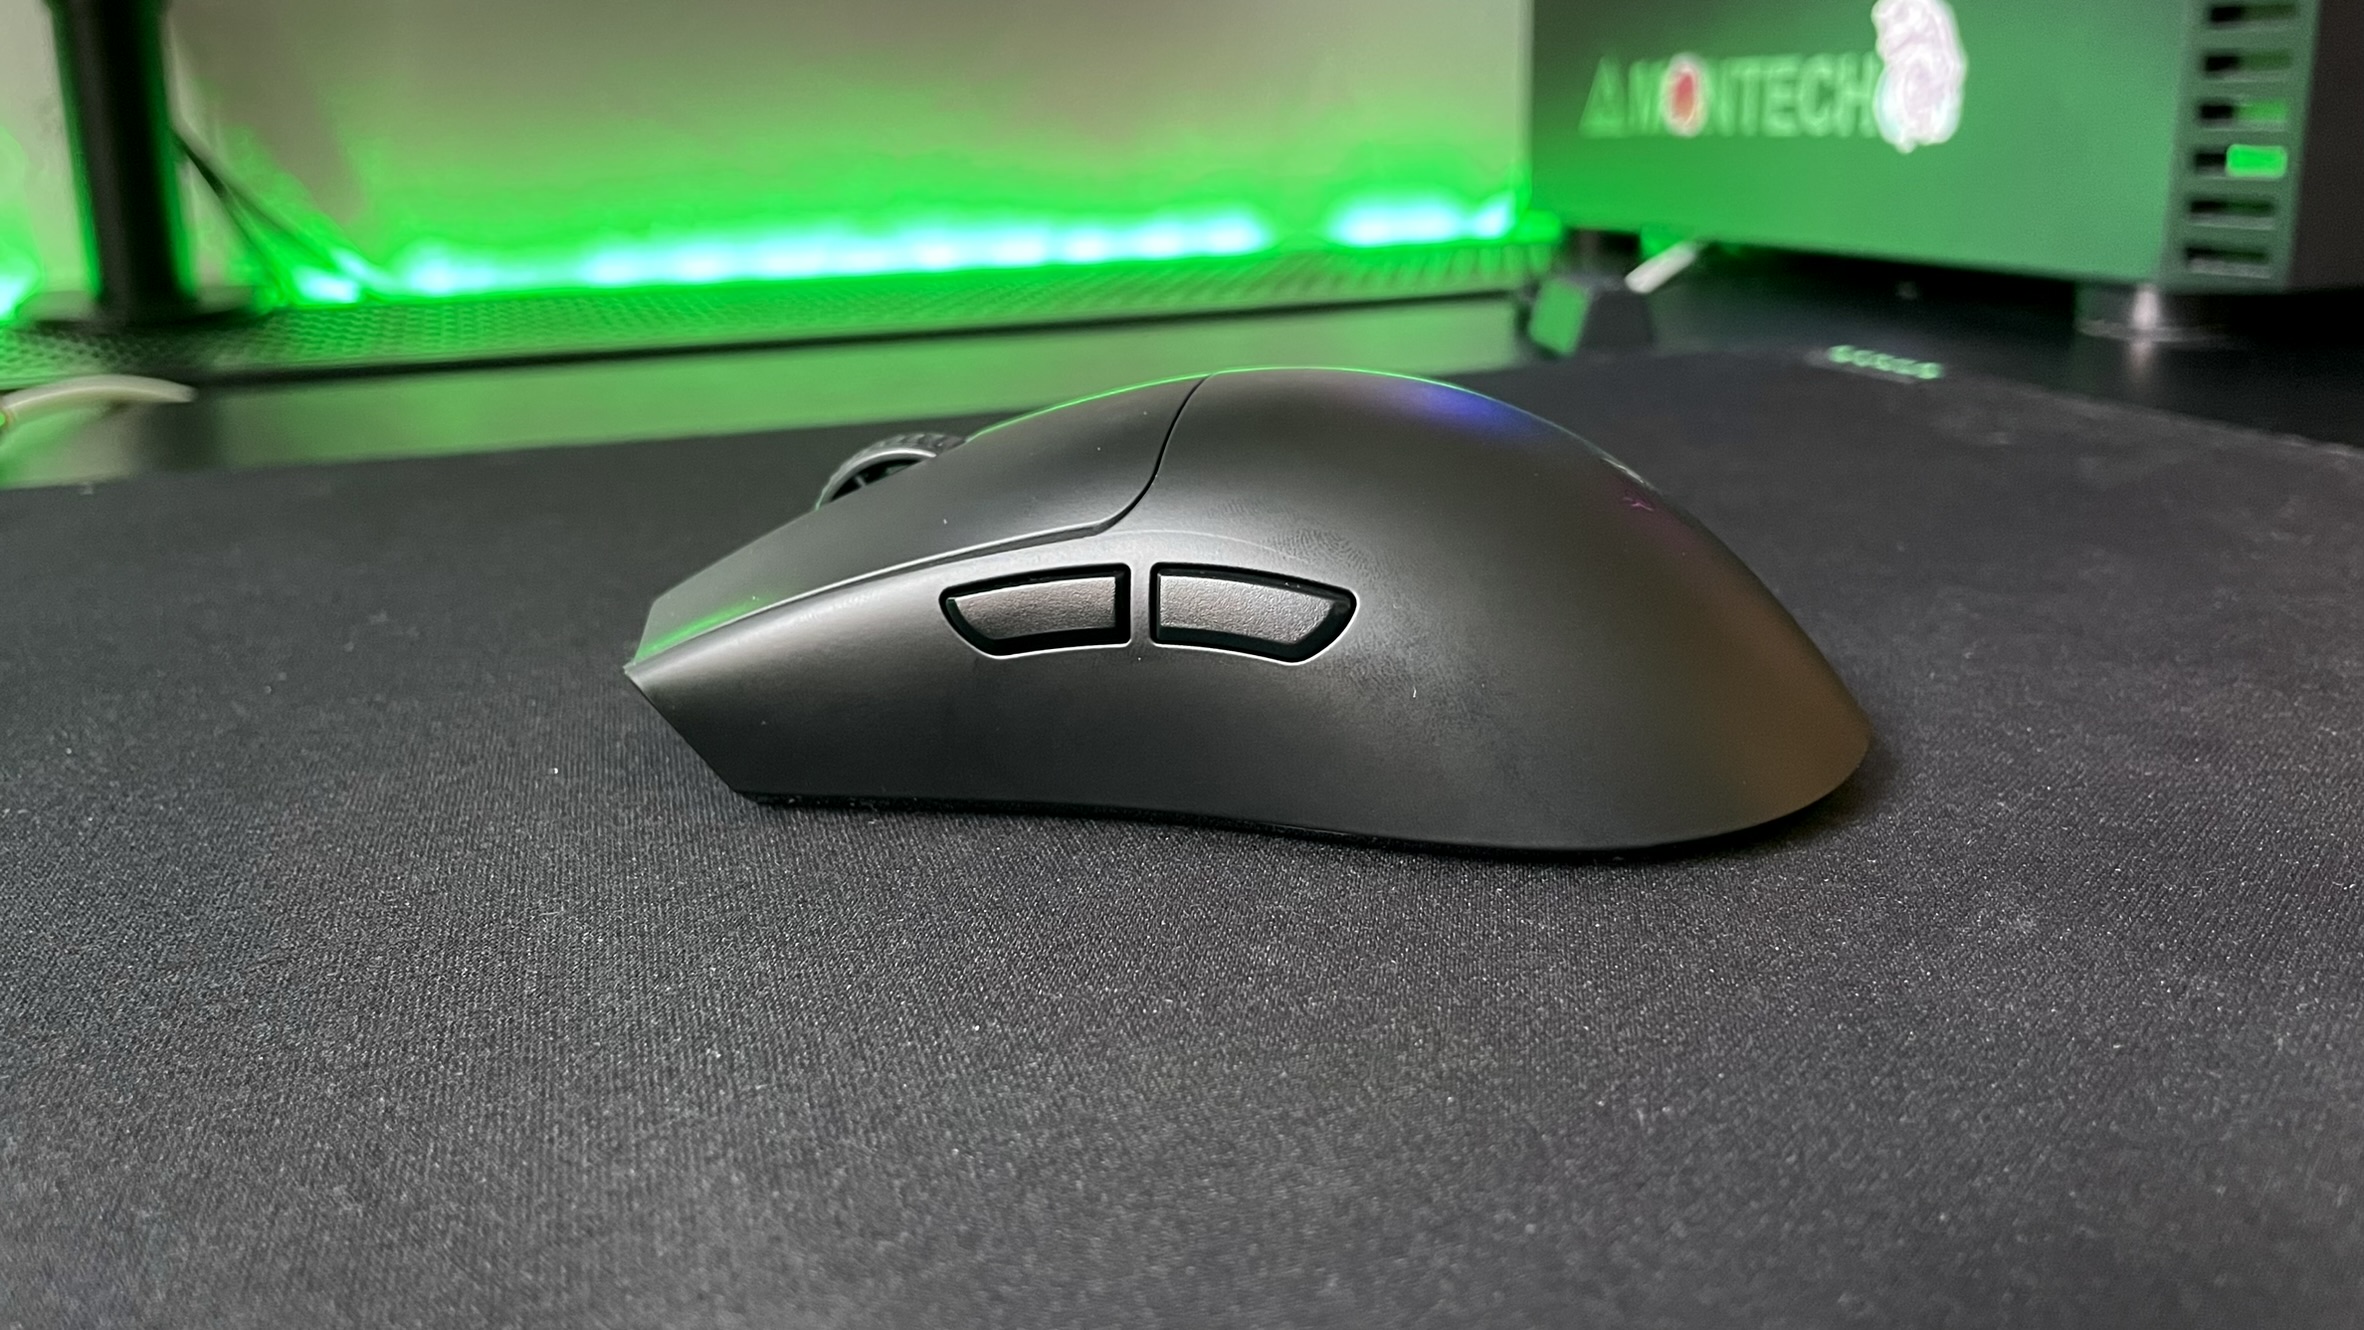 Razer Viper V3 Pro features increased side button spacing